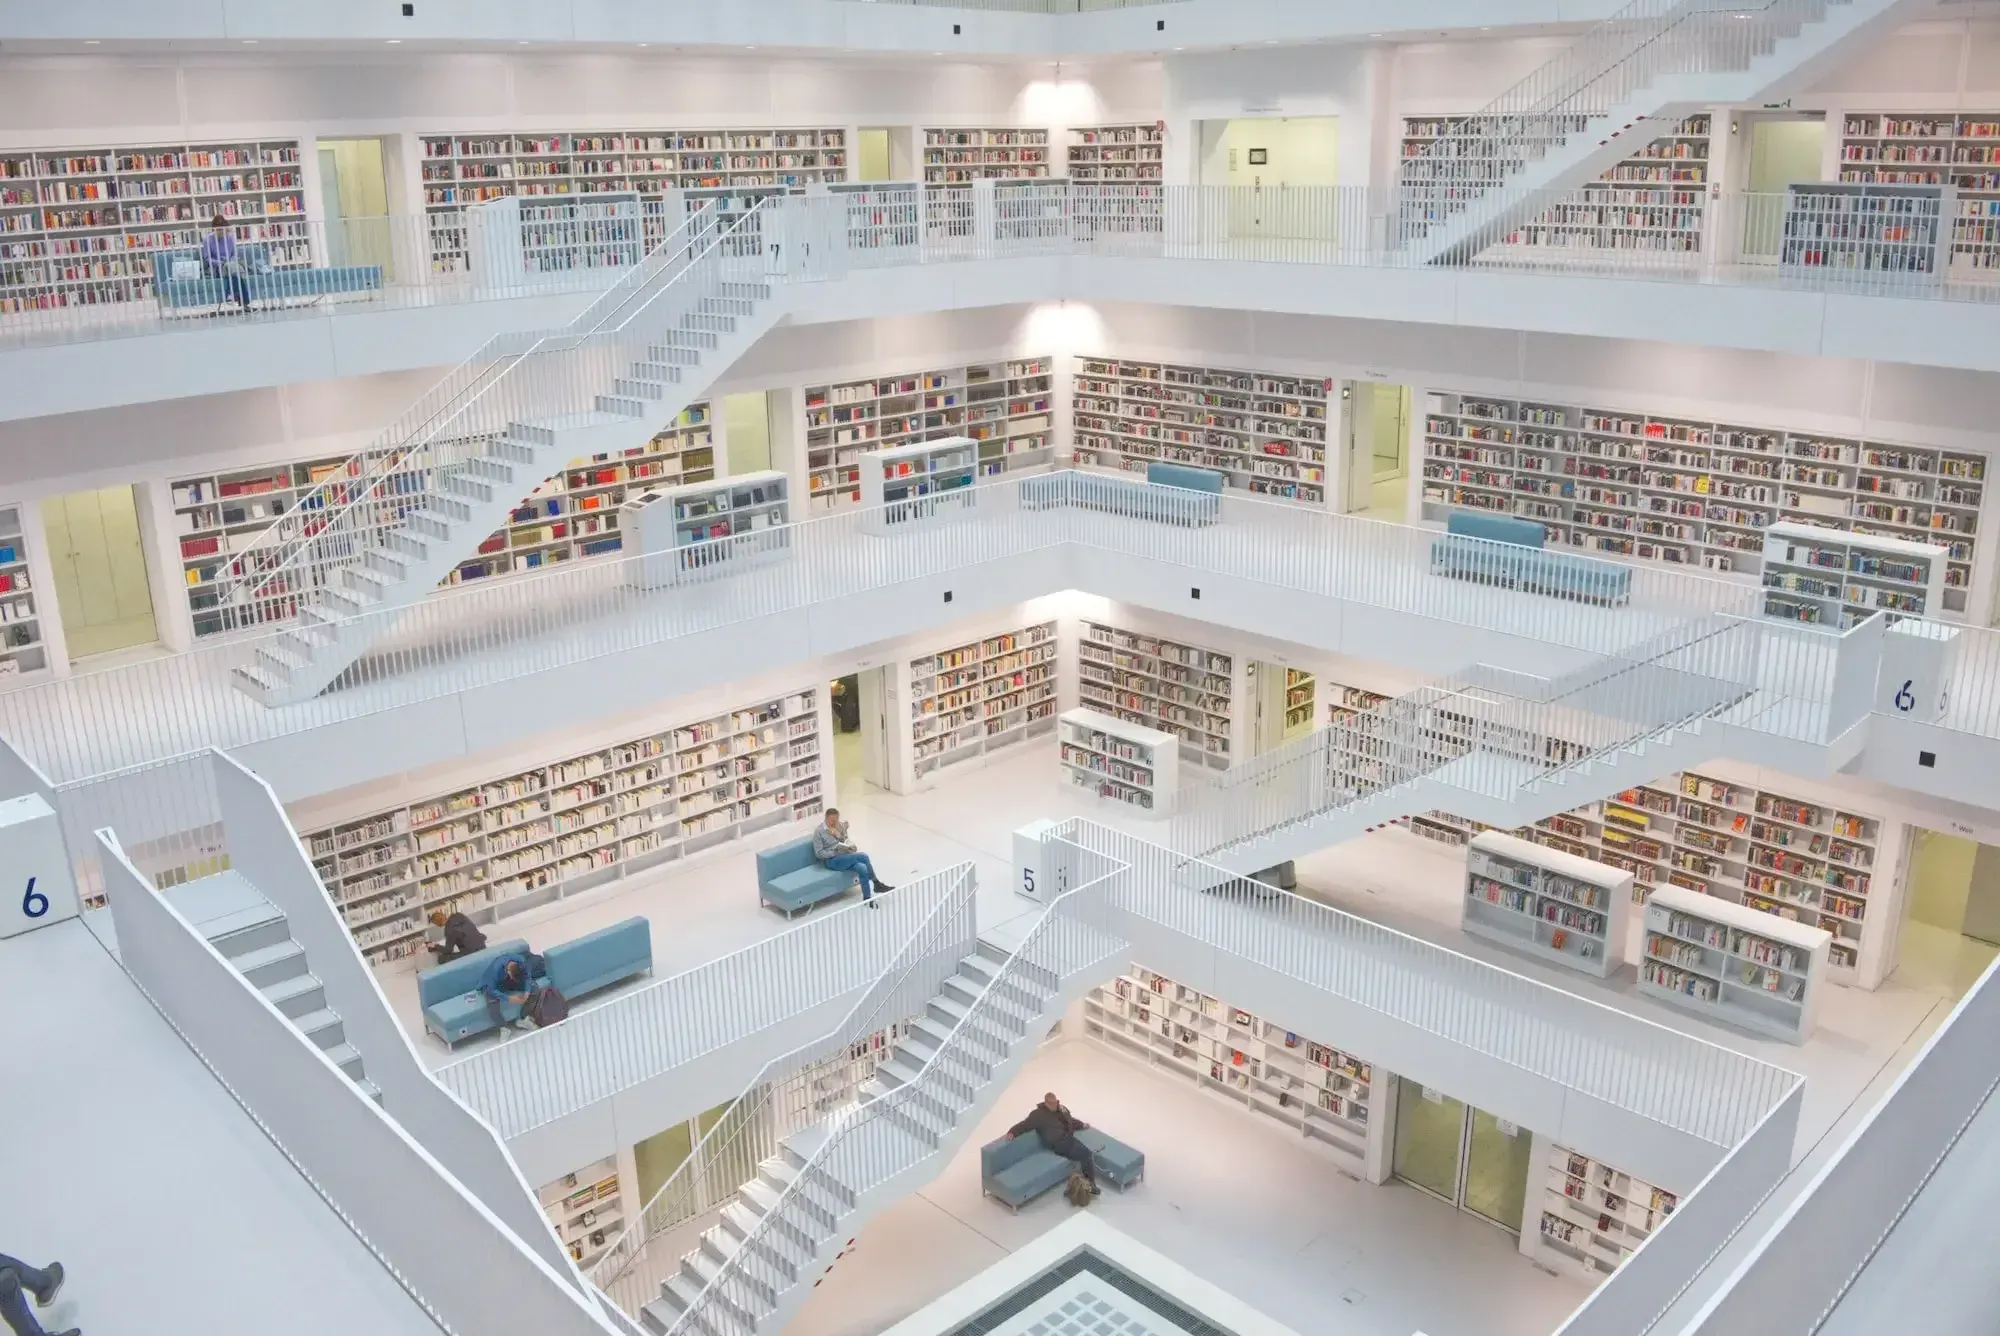 Huge library with white floors and white staircases and grey sofas, some people reading on them.